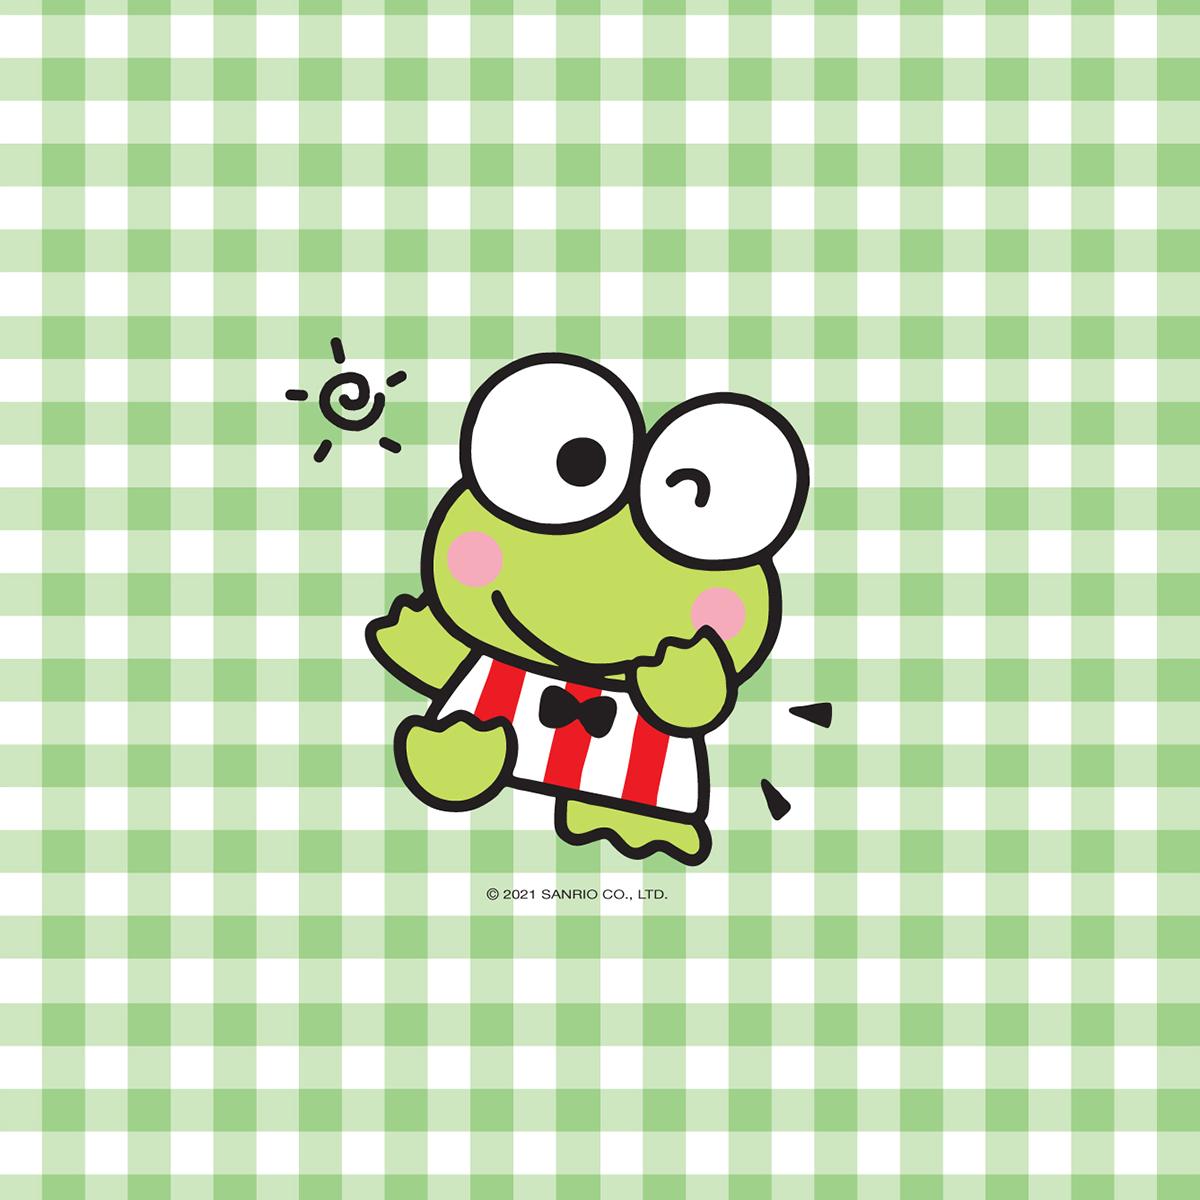 Twitter 上的Sanrio：Take #Keroppi on the go with new background for your phone!